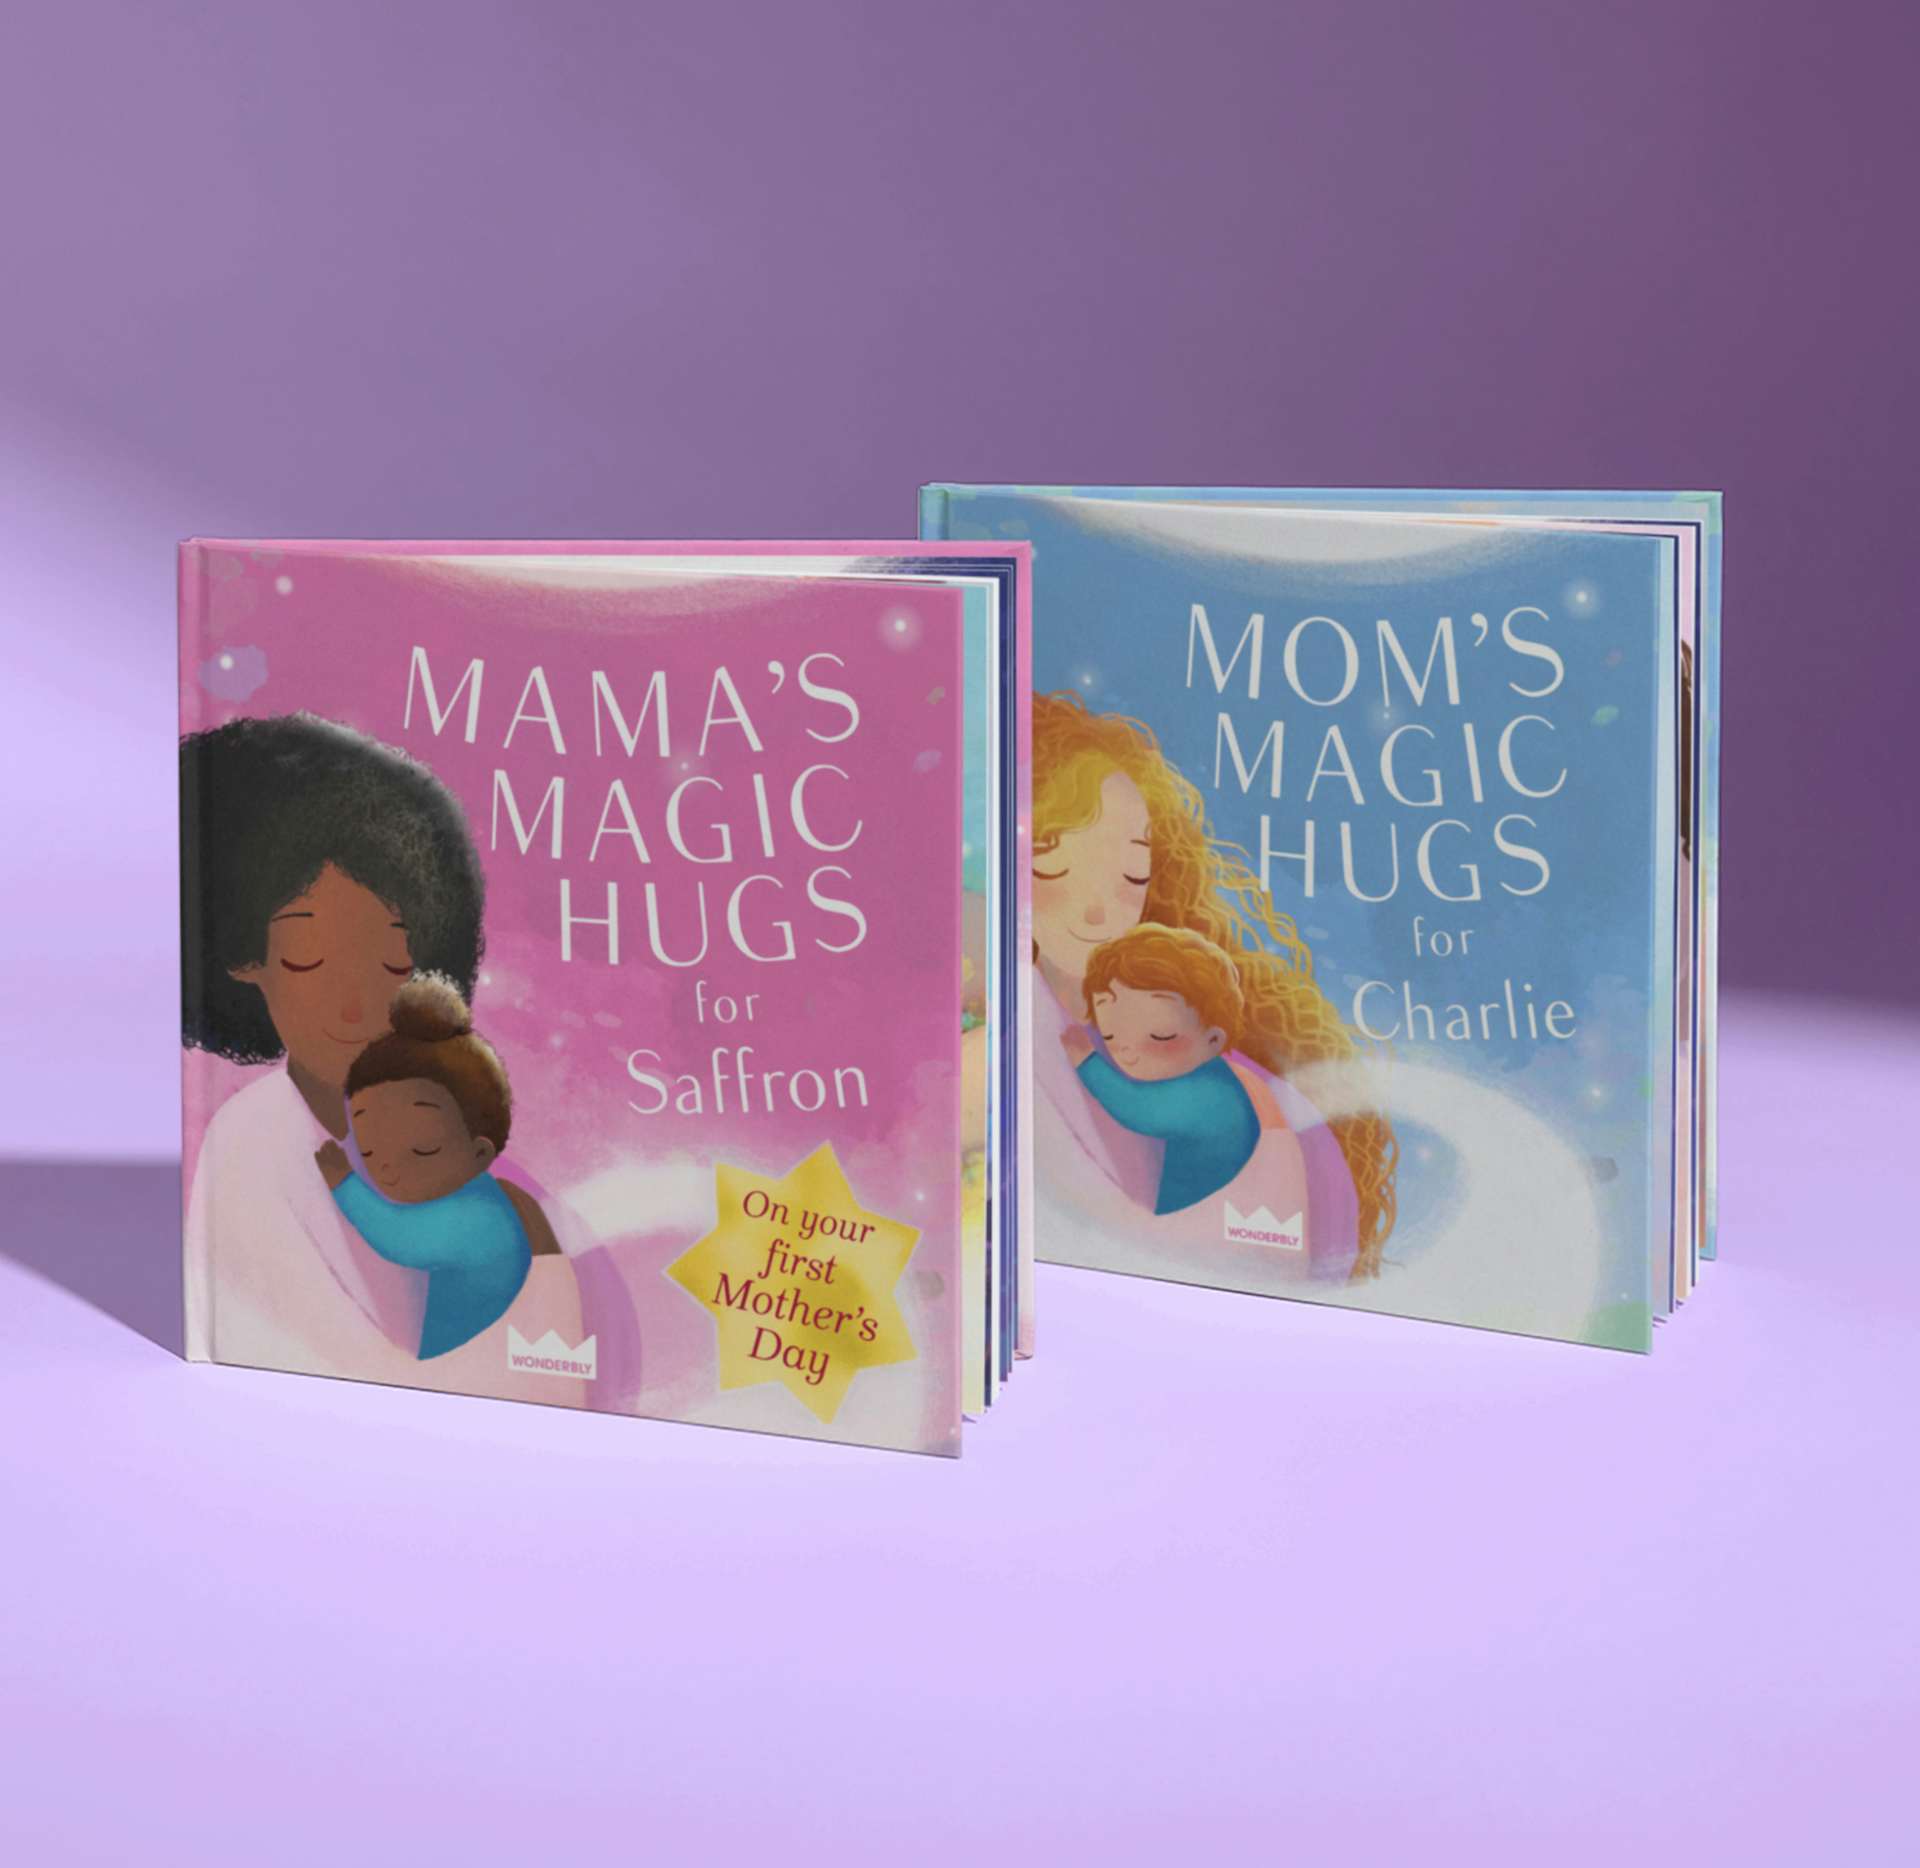 mommy's magic hugs book with different colours and special edition cover